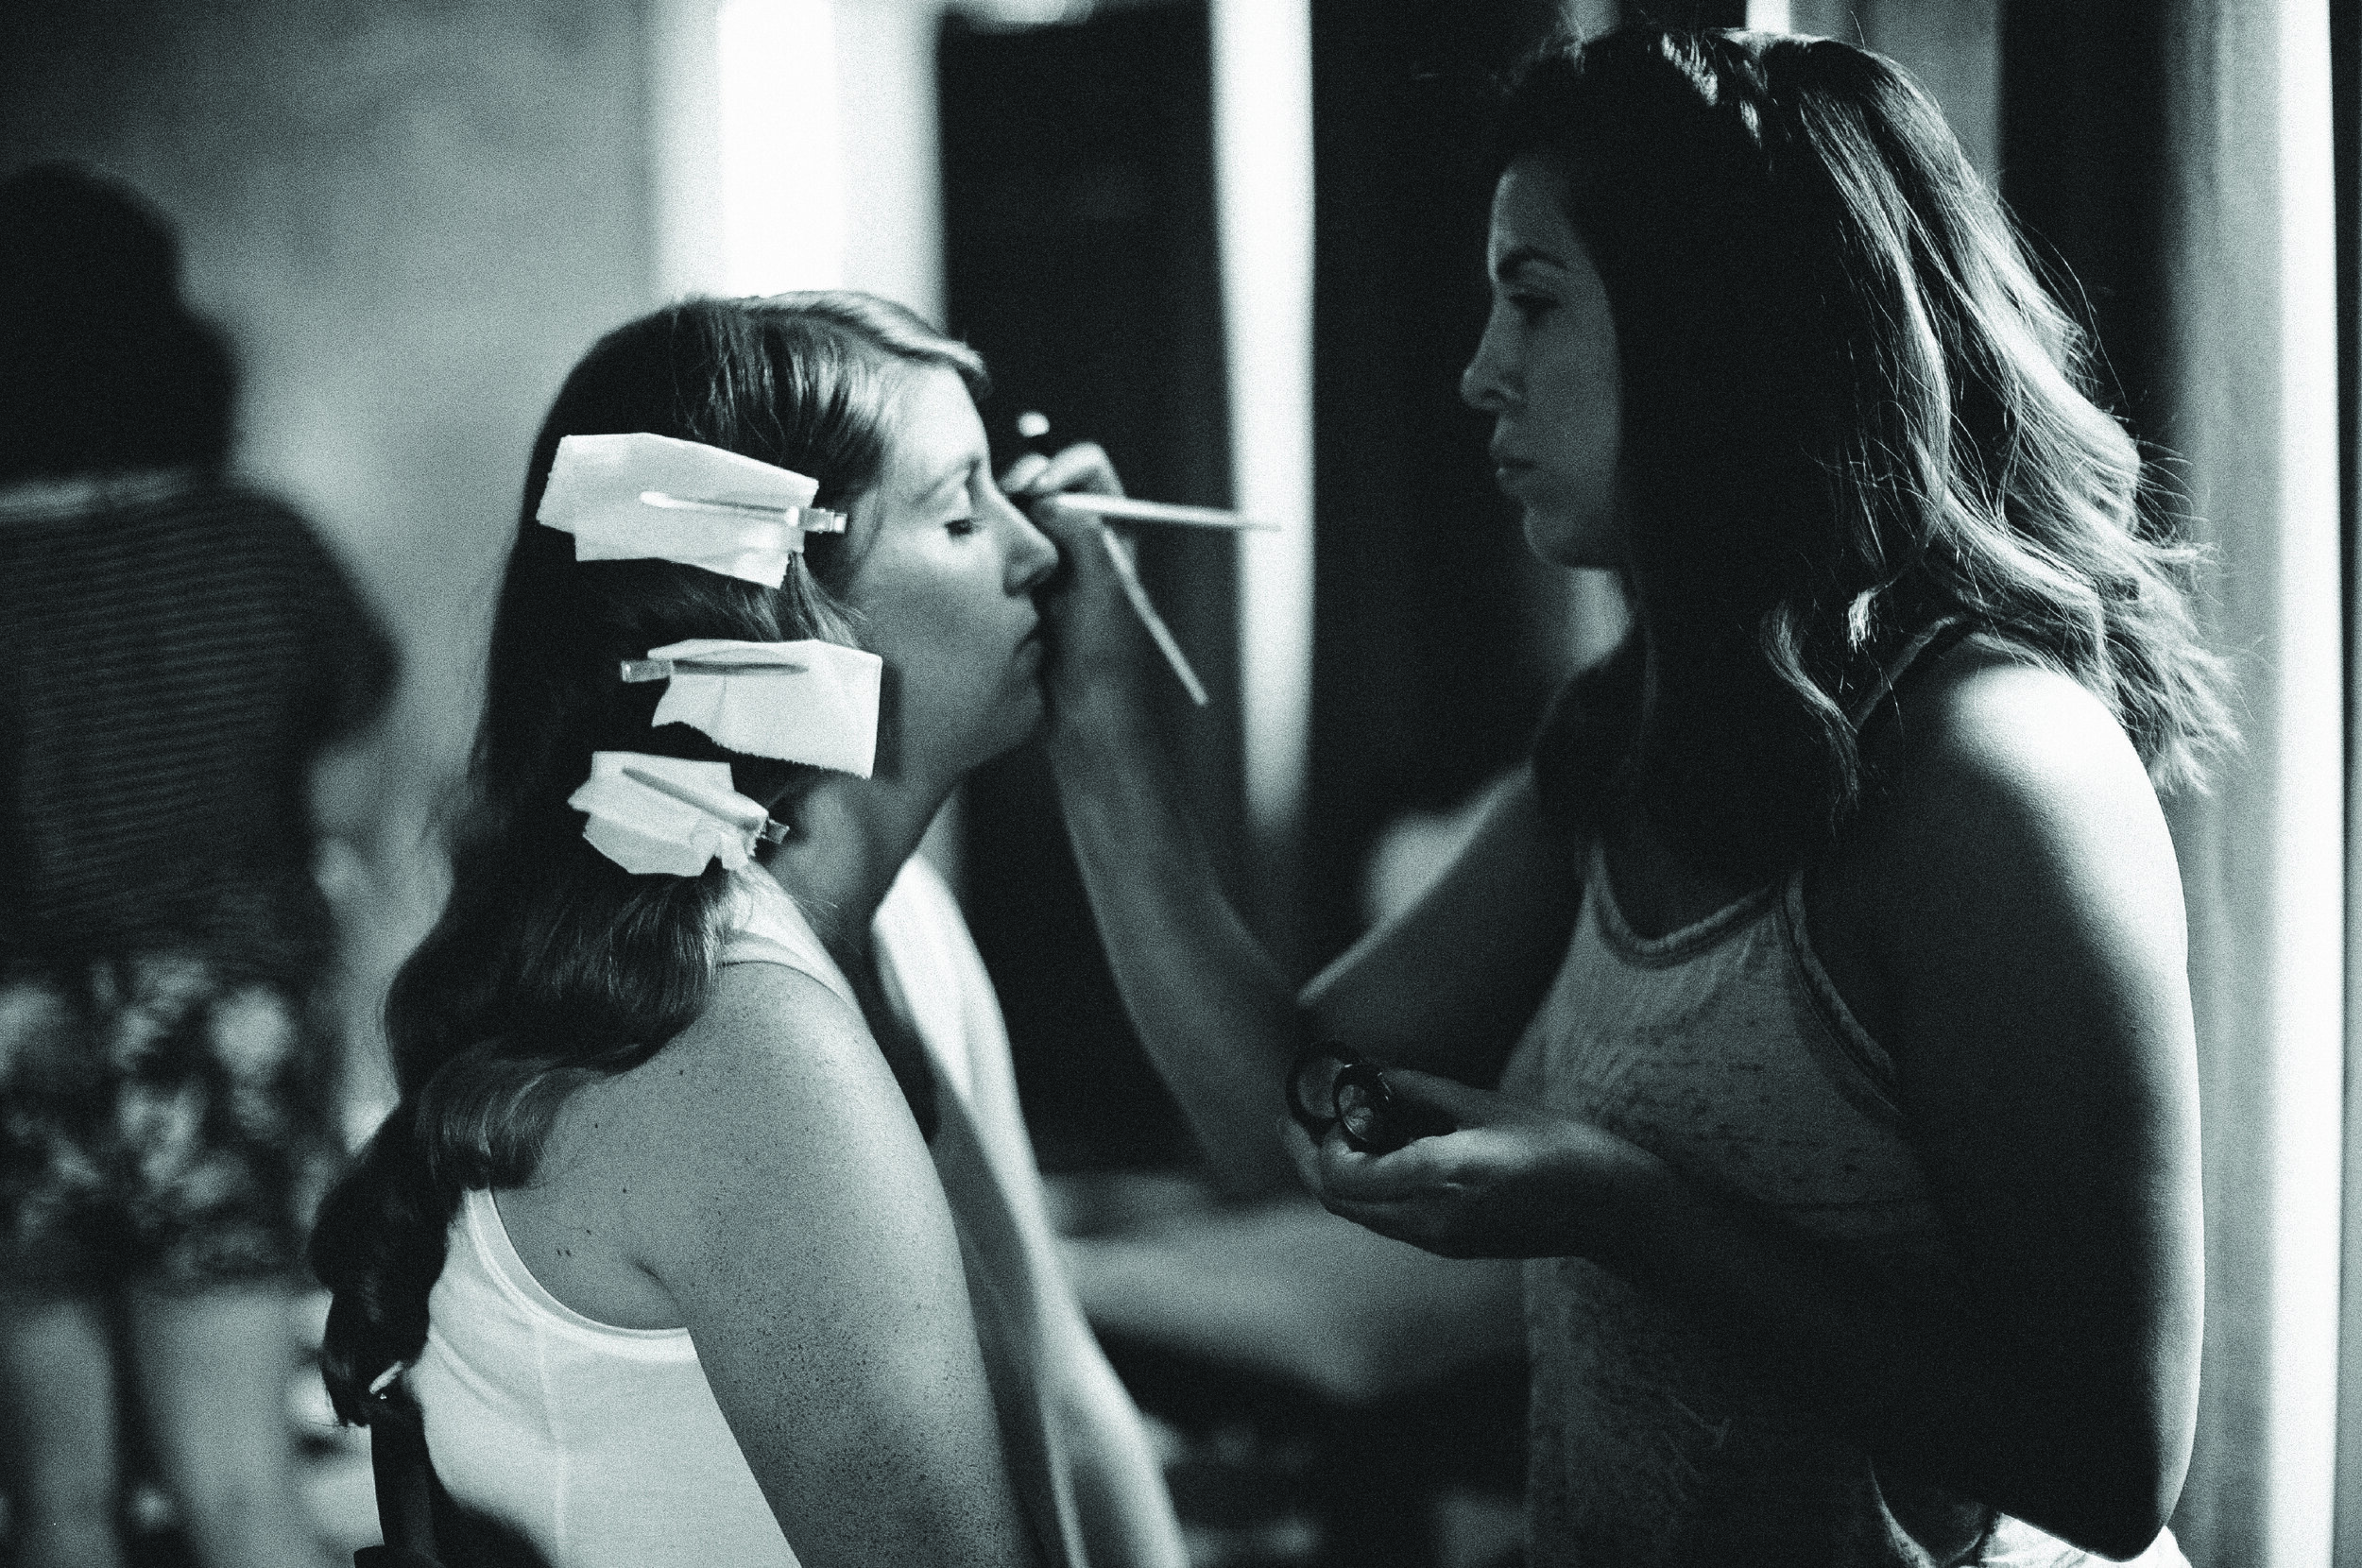 Skye Martin applying makeup on a bride at Giving Beauty Co. in Denver, CO